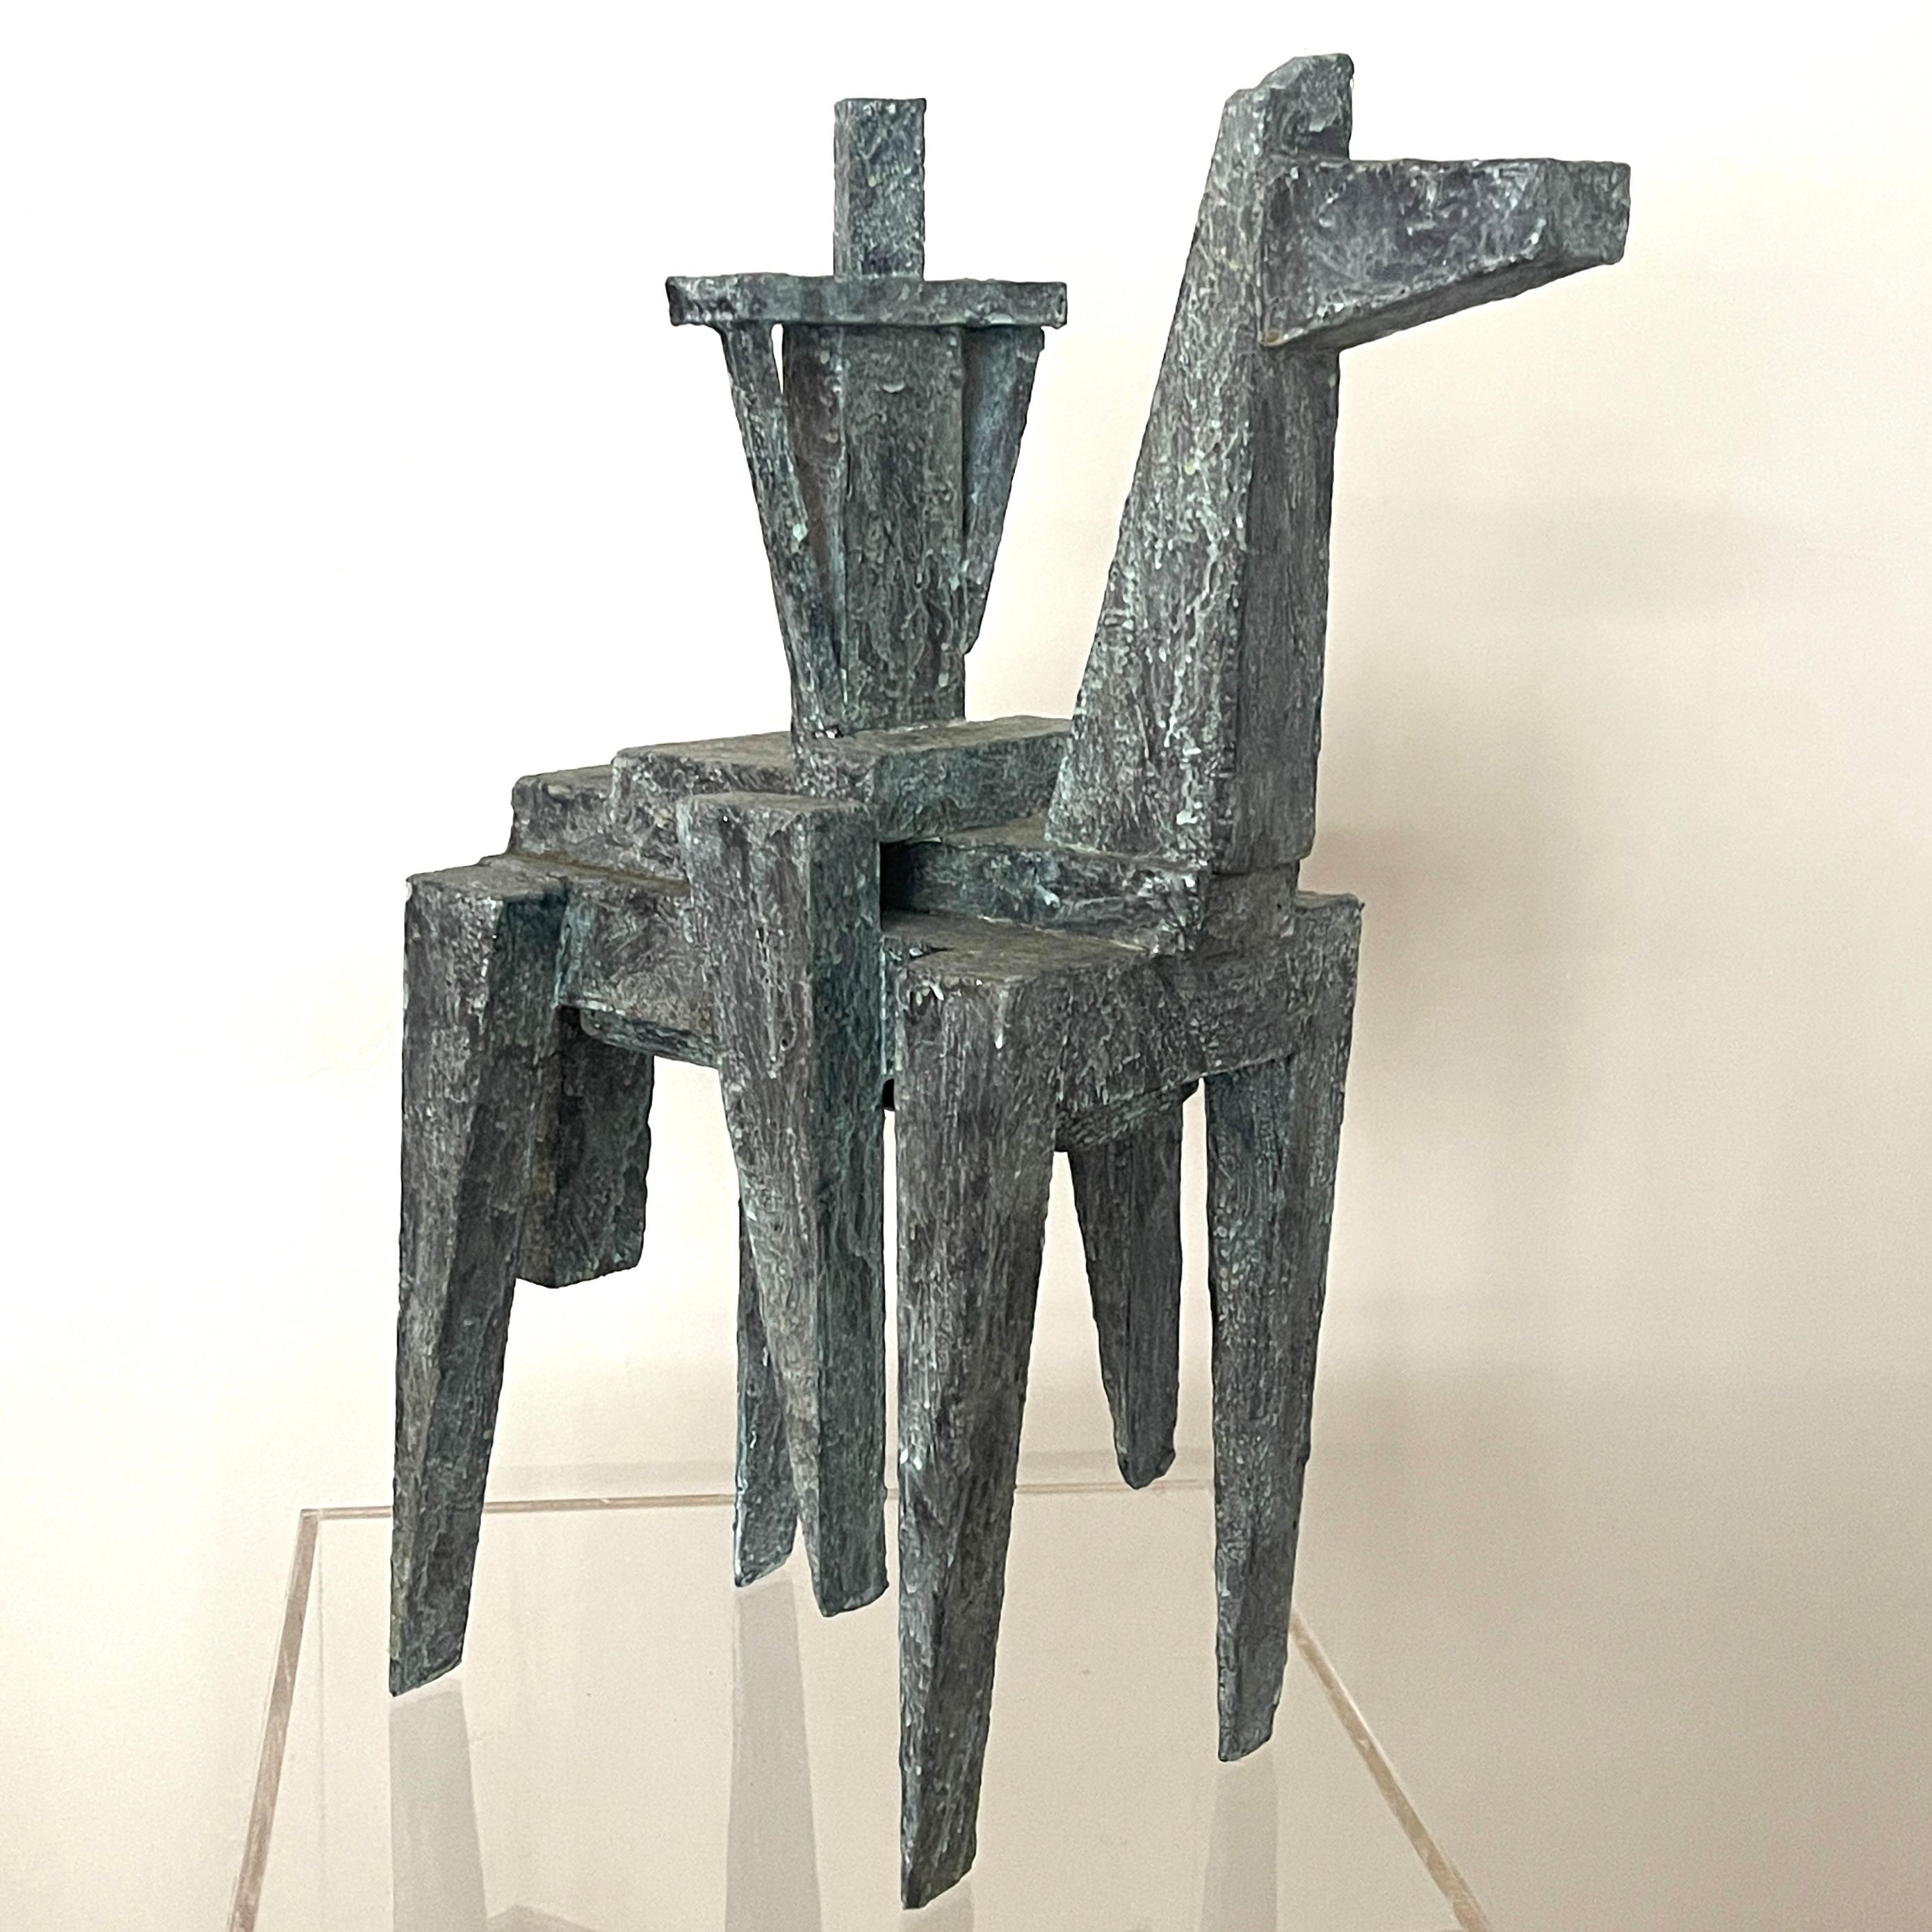 Modernist Cubist Sculpture by Bill Low with Weathered Bronze Finish For Sale 9